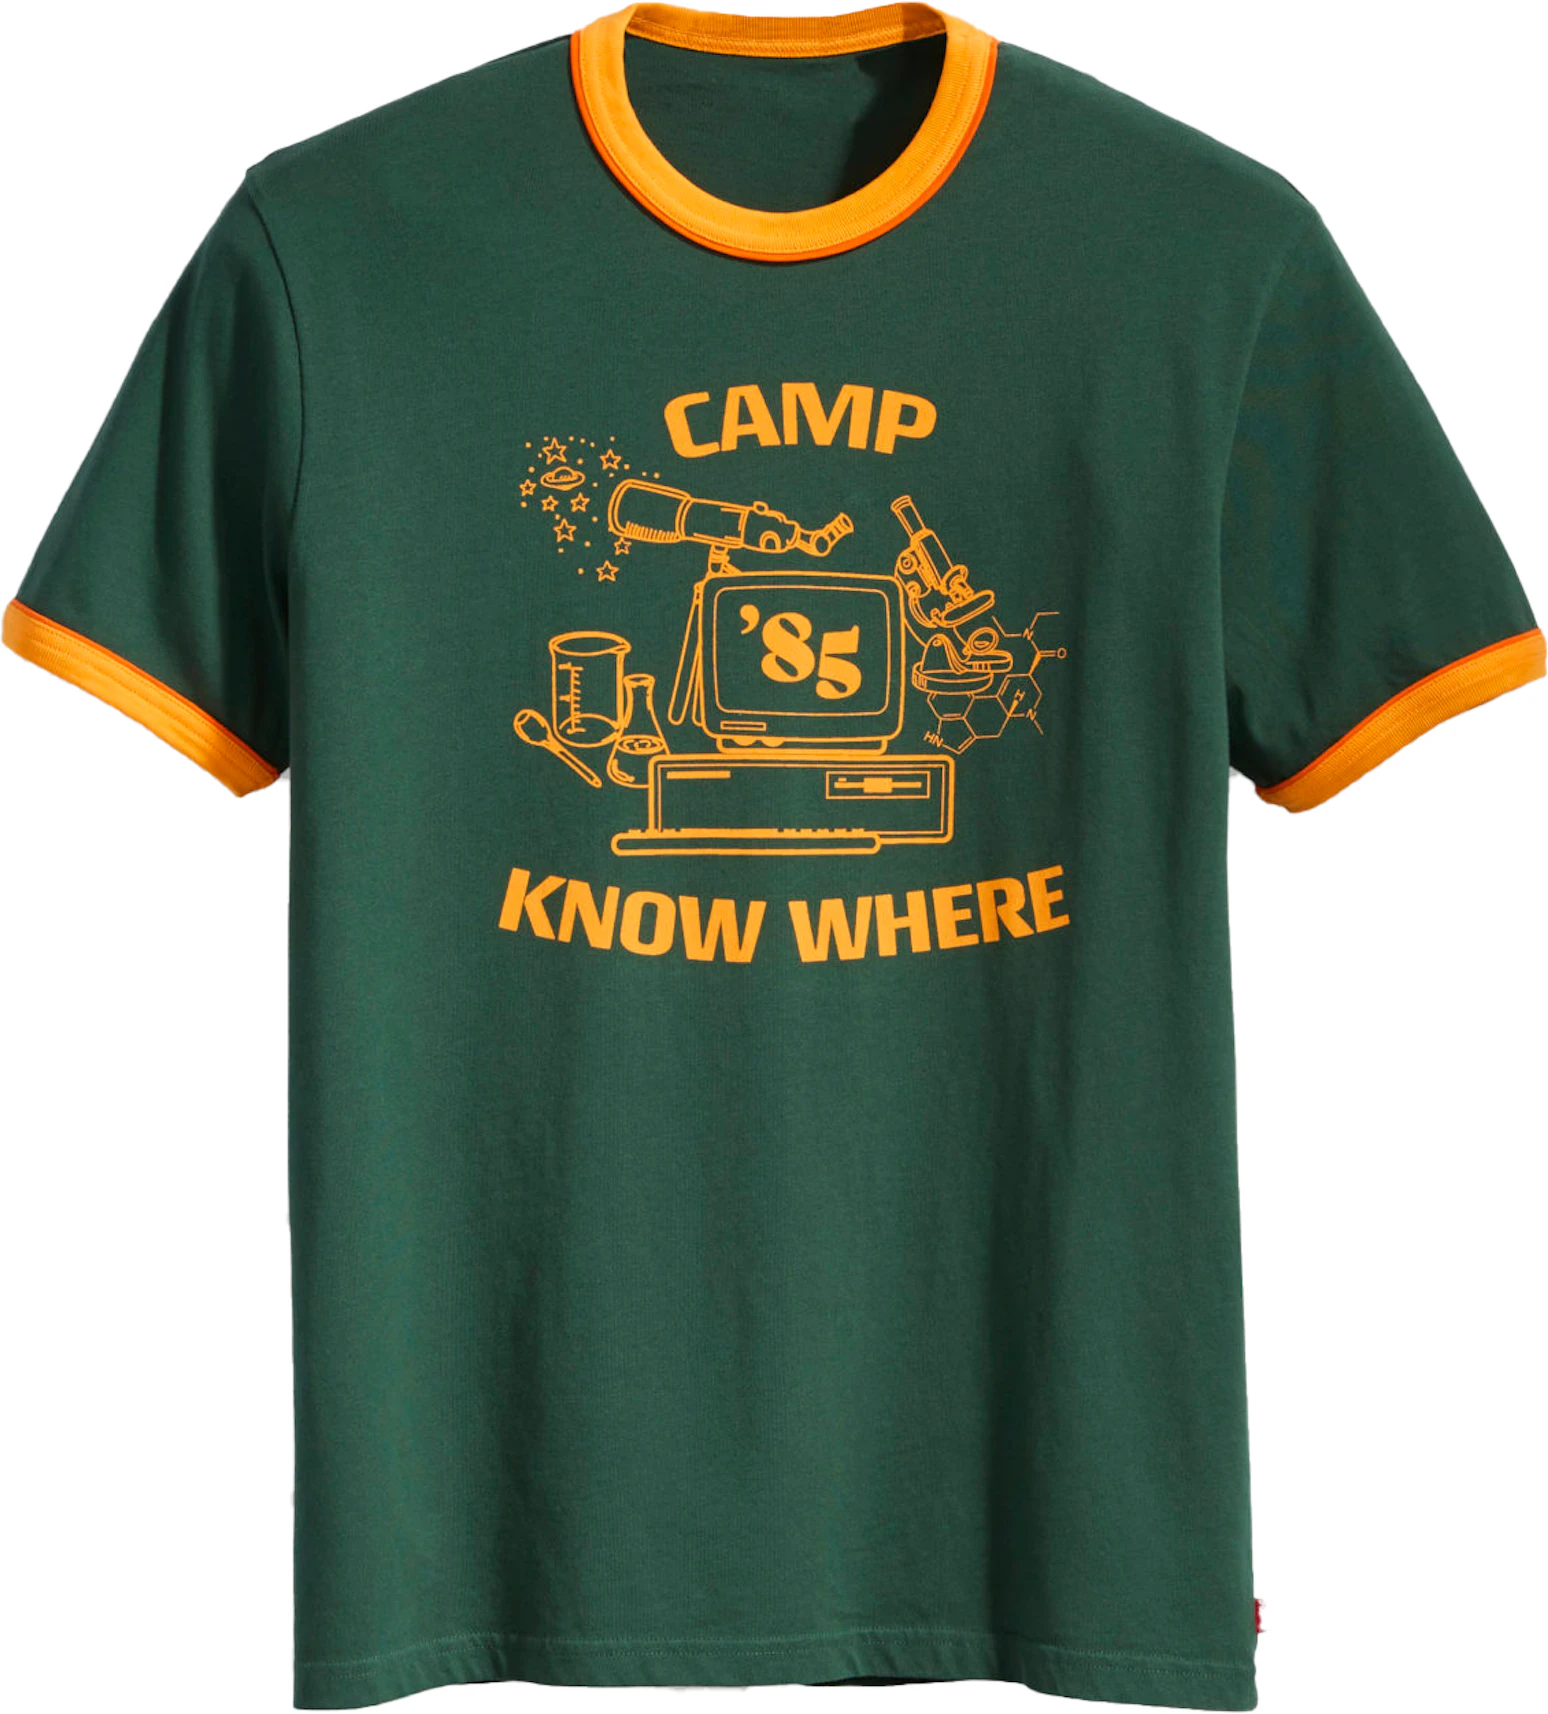 Levis x Stranger Things Camp Know Where Ringer Tee Dark Green - SS19 - US